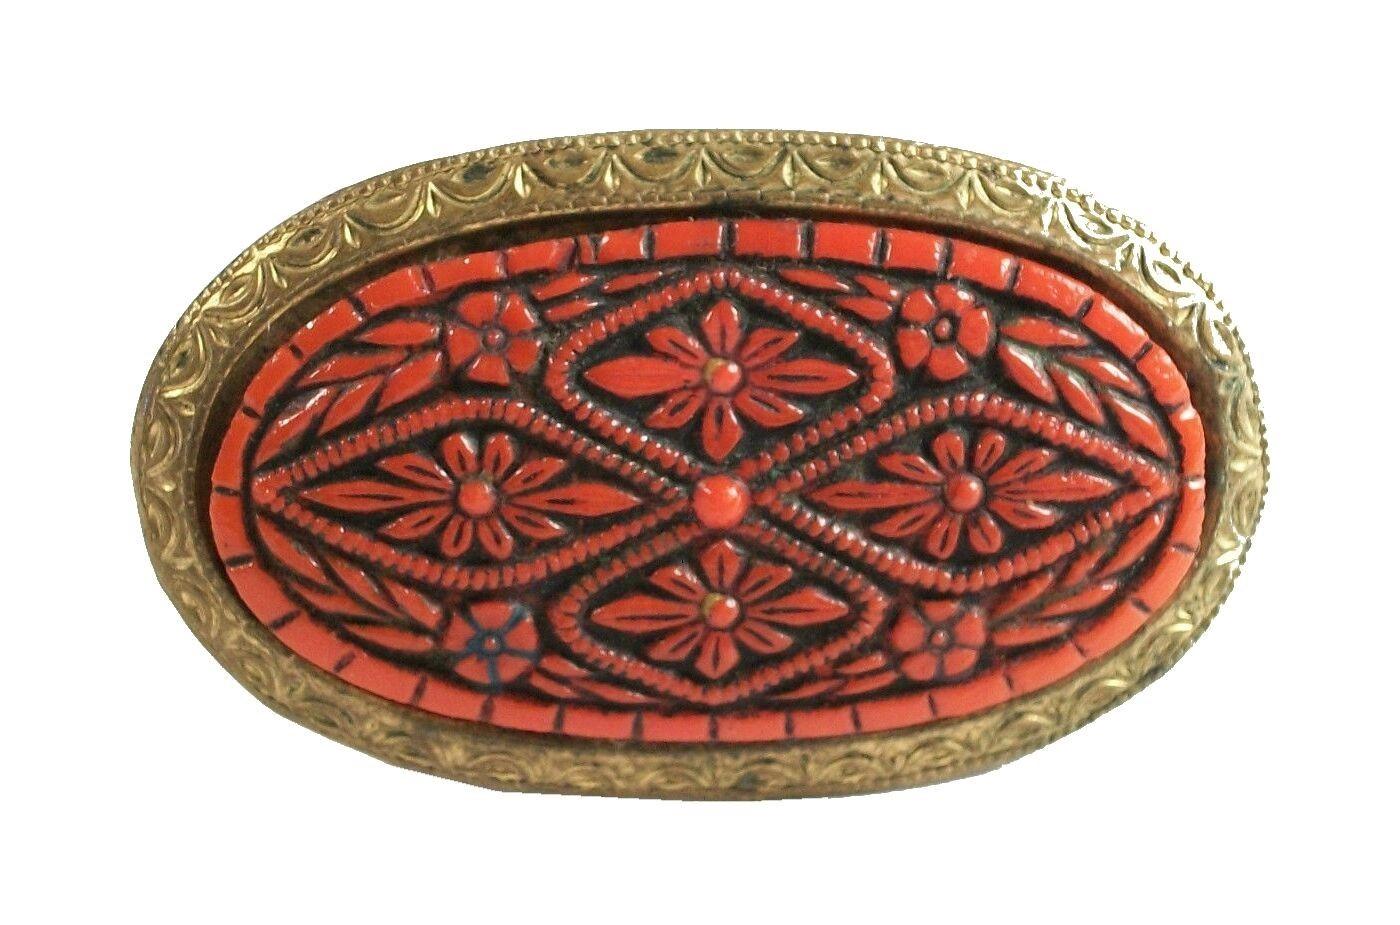 Antique brooch with carved cinnabar lacquer panel - tooled brass edge and back - c clasp and pin - unsigned - China - circa 1920's.

Excellent antique condition - no loss - no damage - no repairs - tarnishing of the brass trim from age and